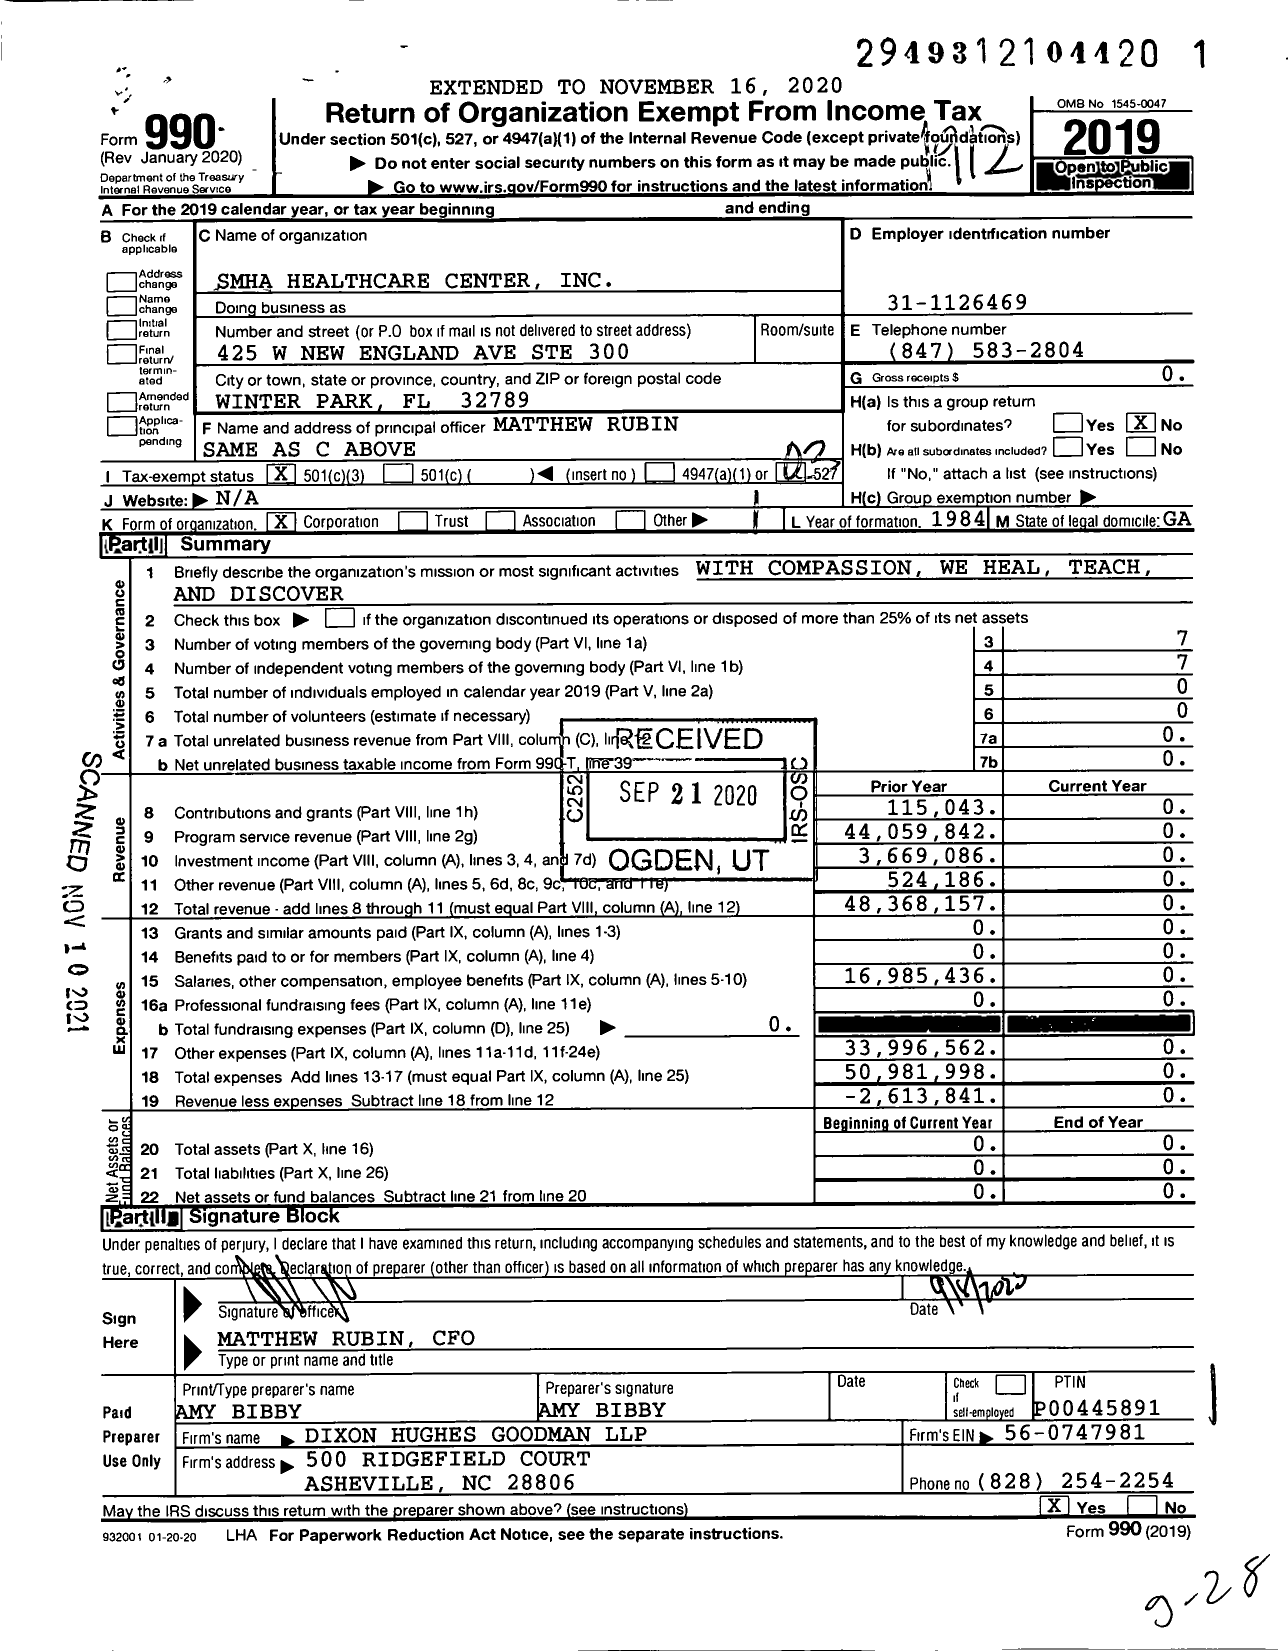 Image of first page of 2019 Form 990 for Smha Healthcare Center (MUMC)